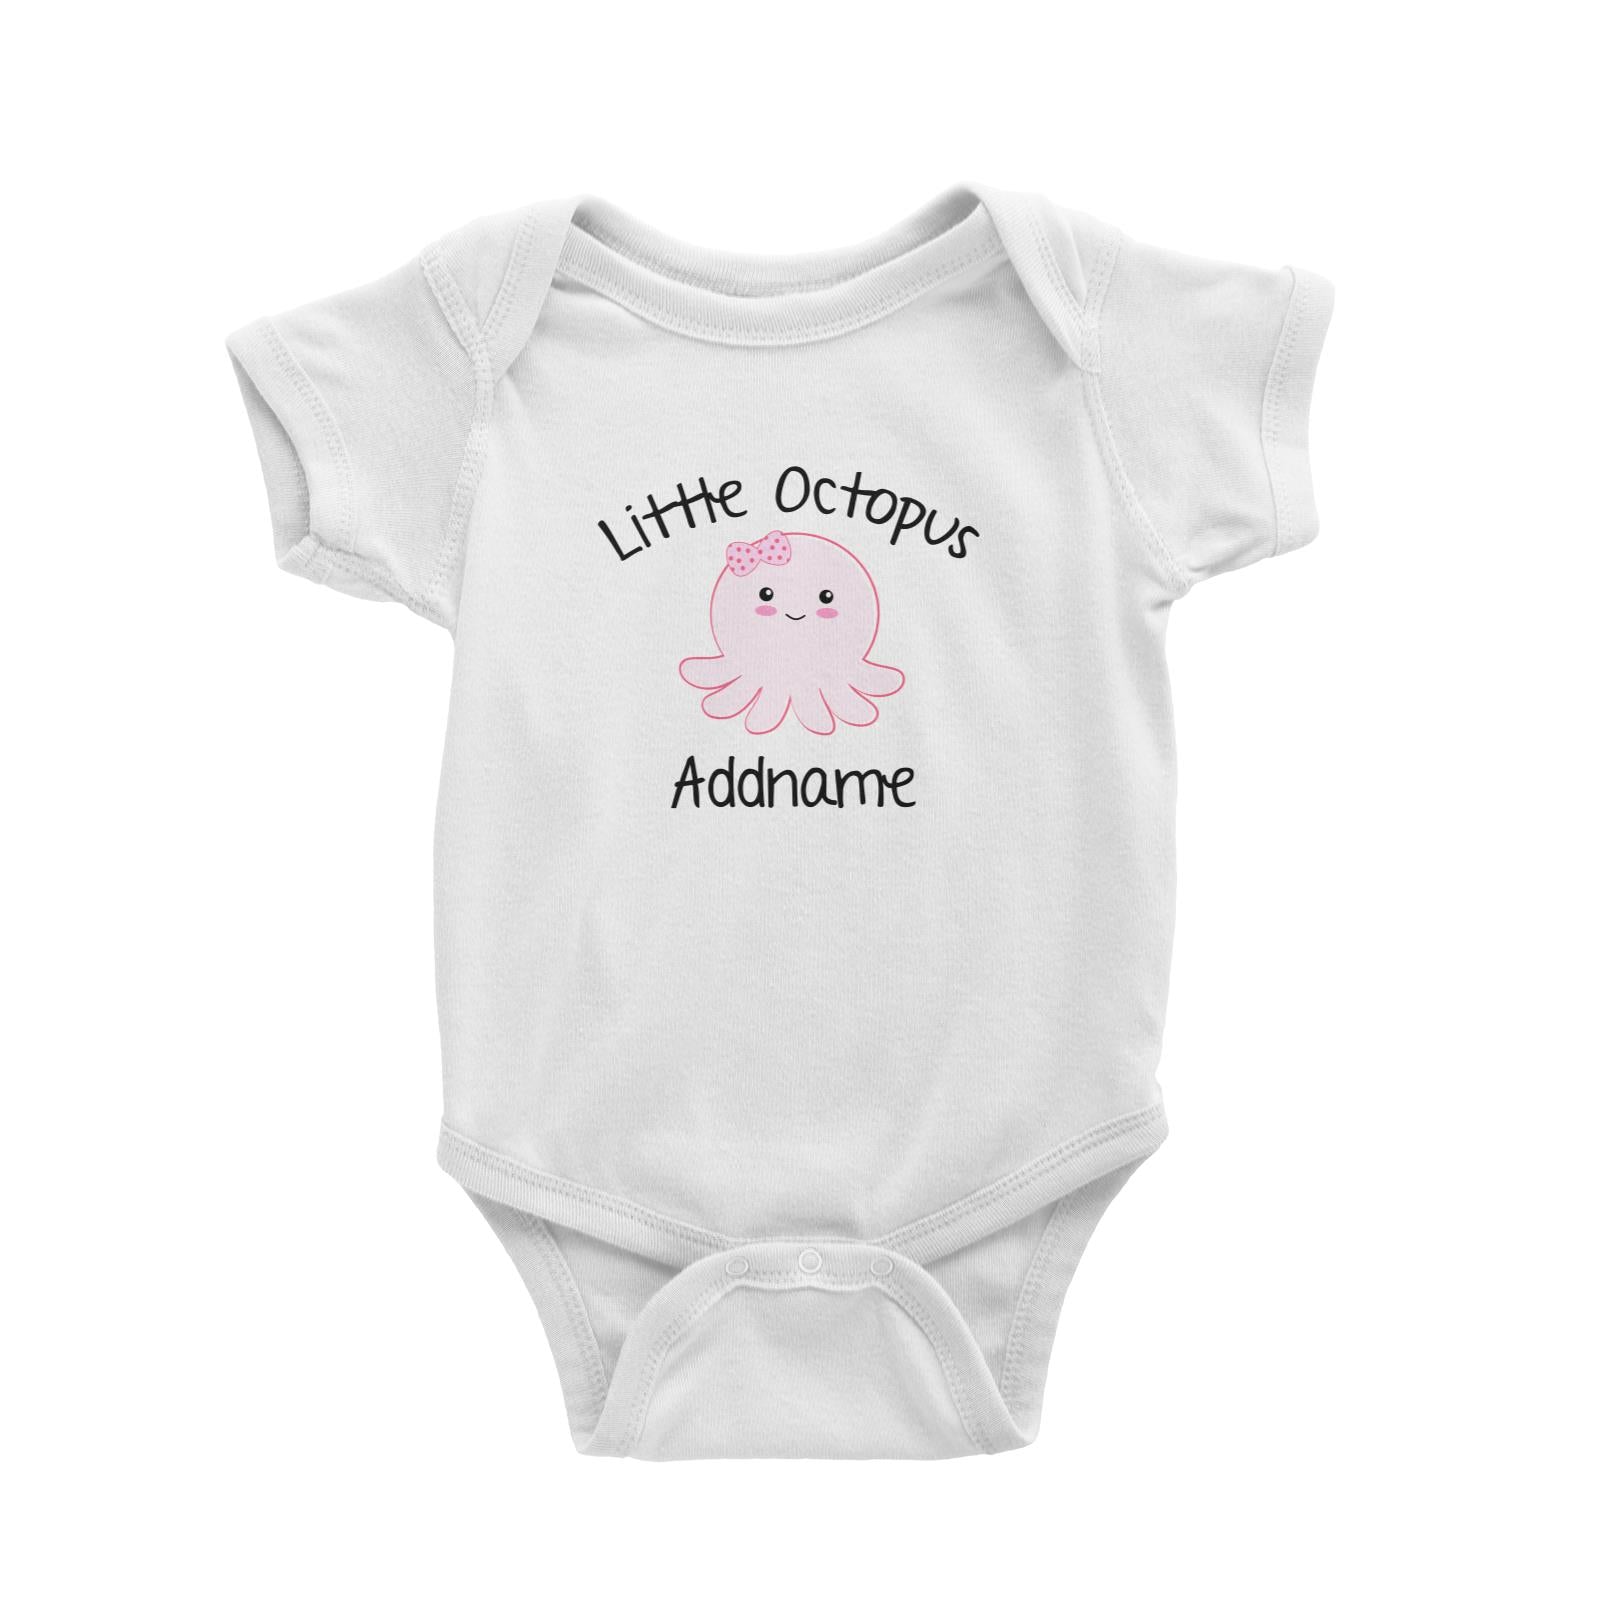 Cute Animals And Friends Series Little Octopus Girl Addname Baby Romper